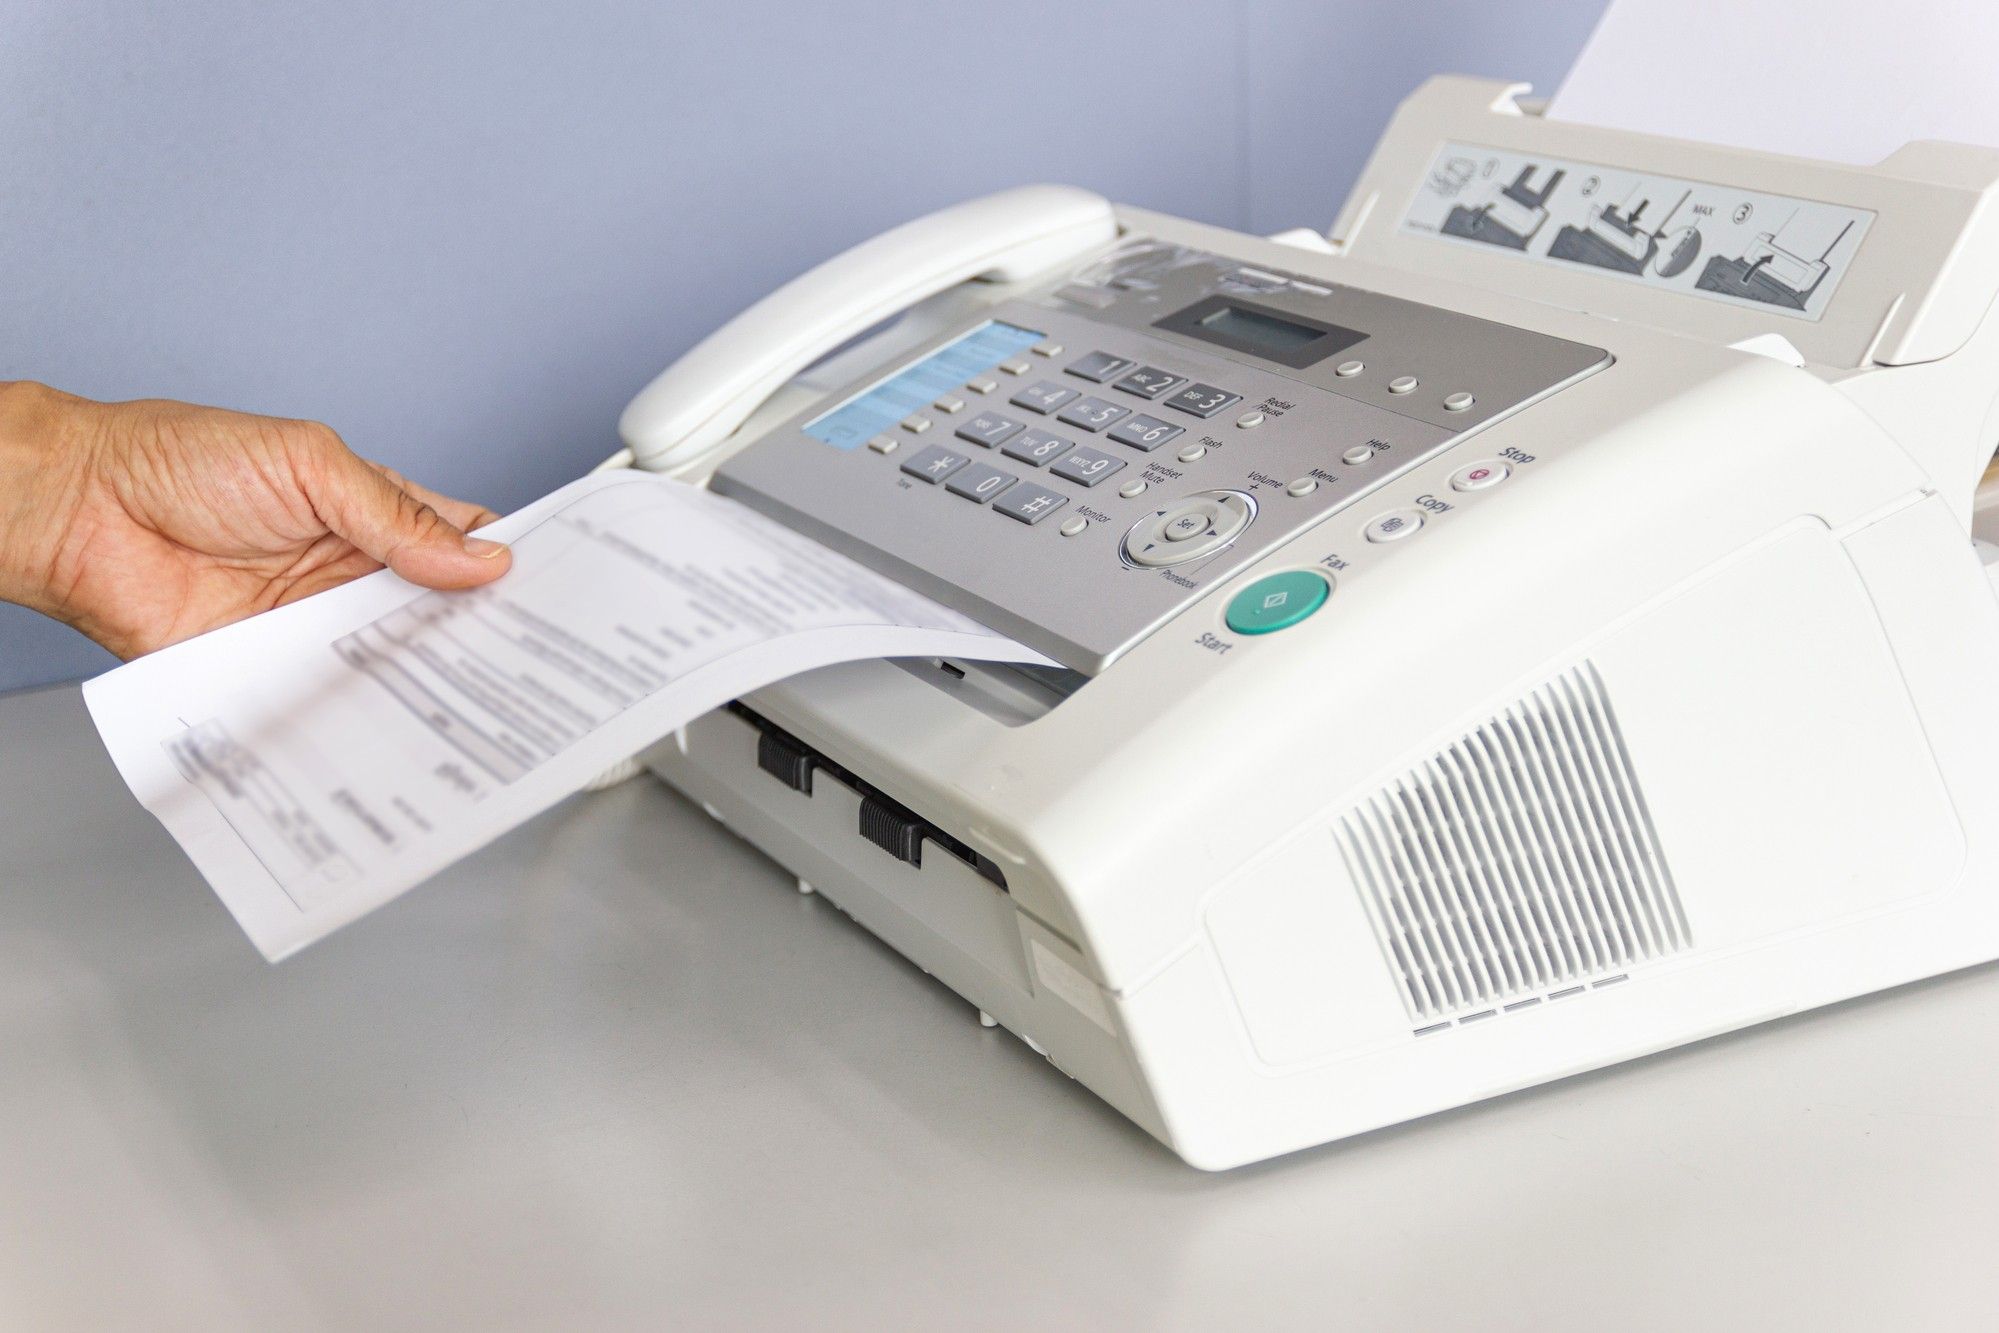 Fax machine with hand taking a fax